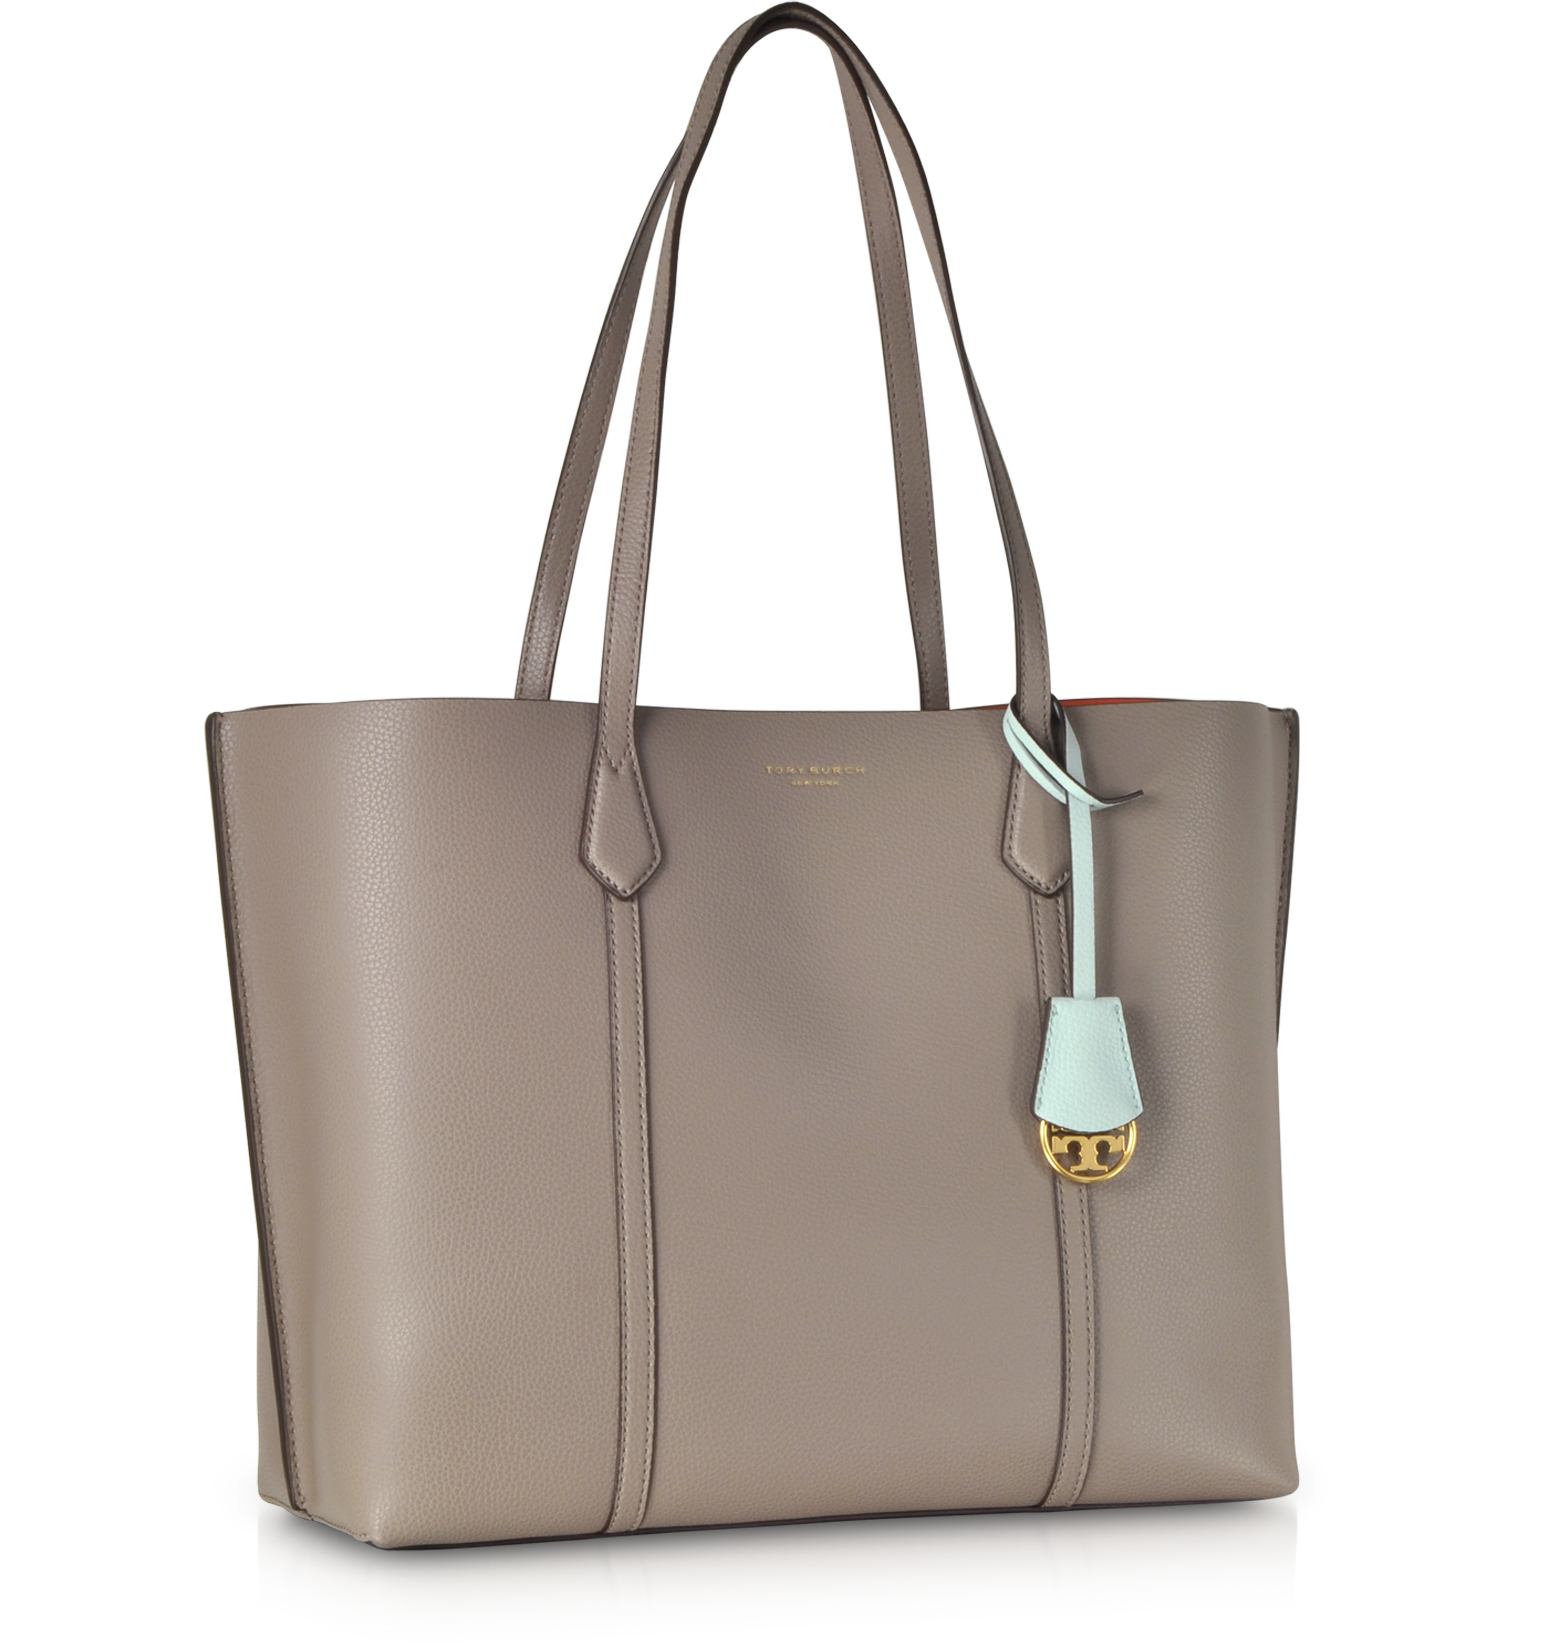 Tory Burch Gray Perry Triple-Compartment Tote Bag at FORZIERI